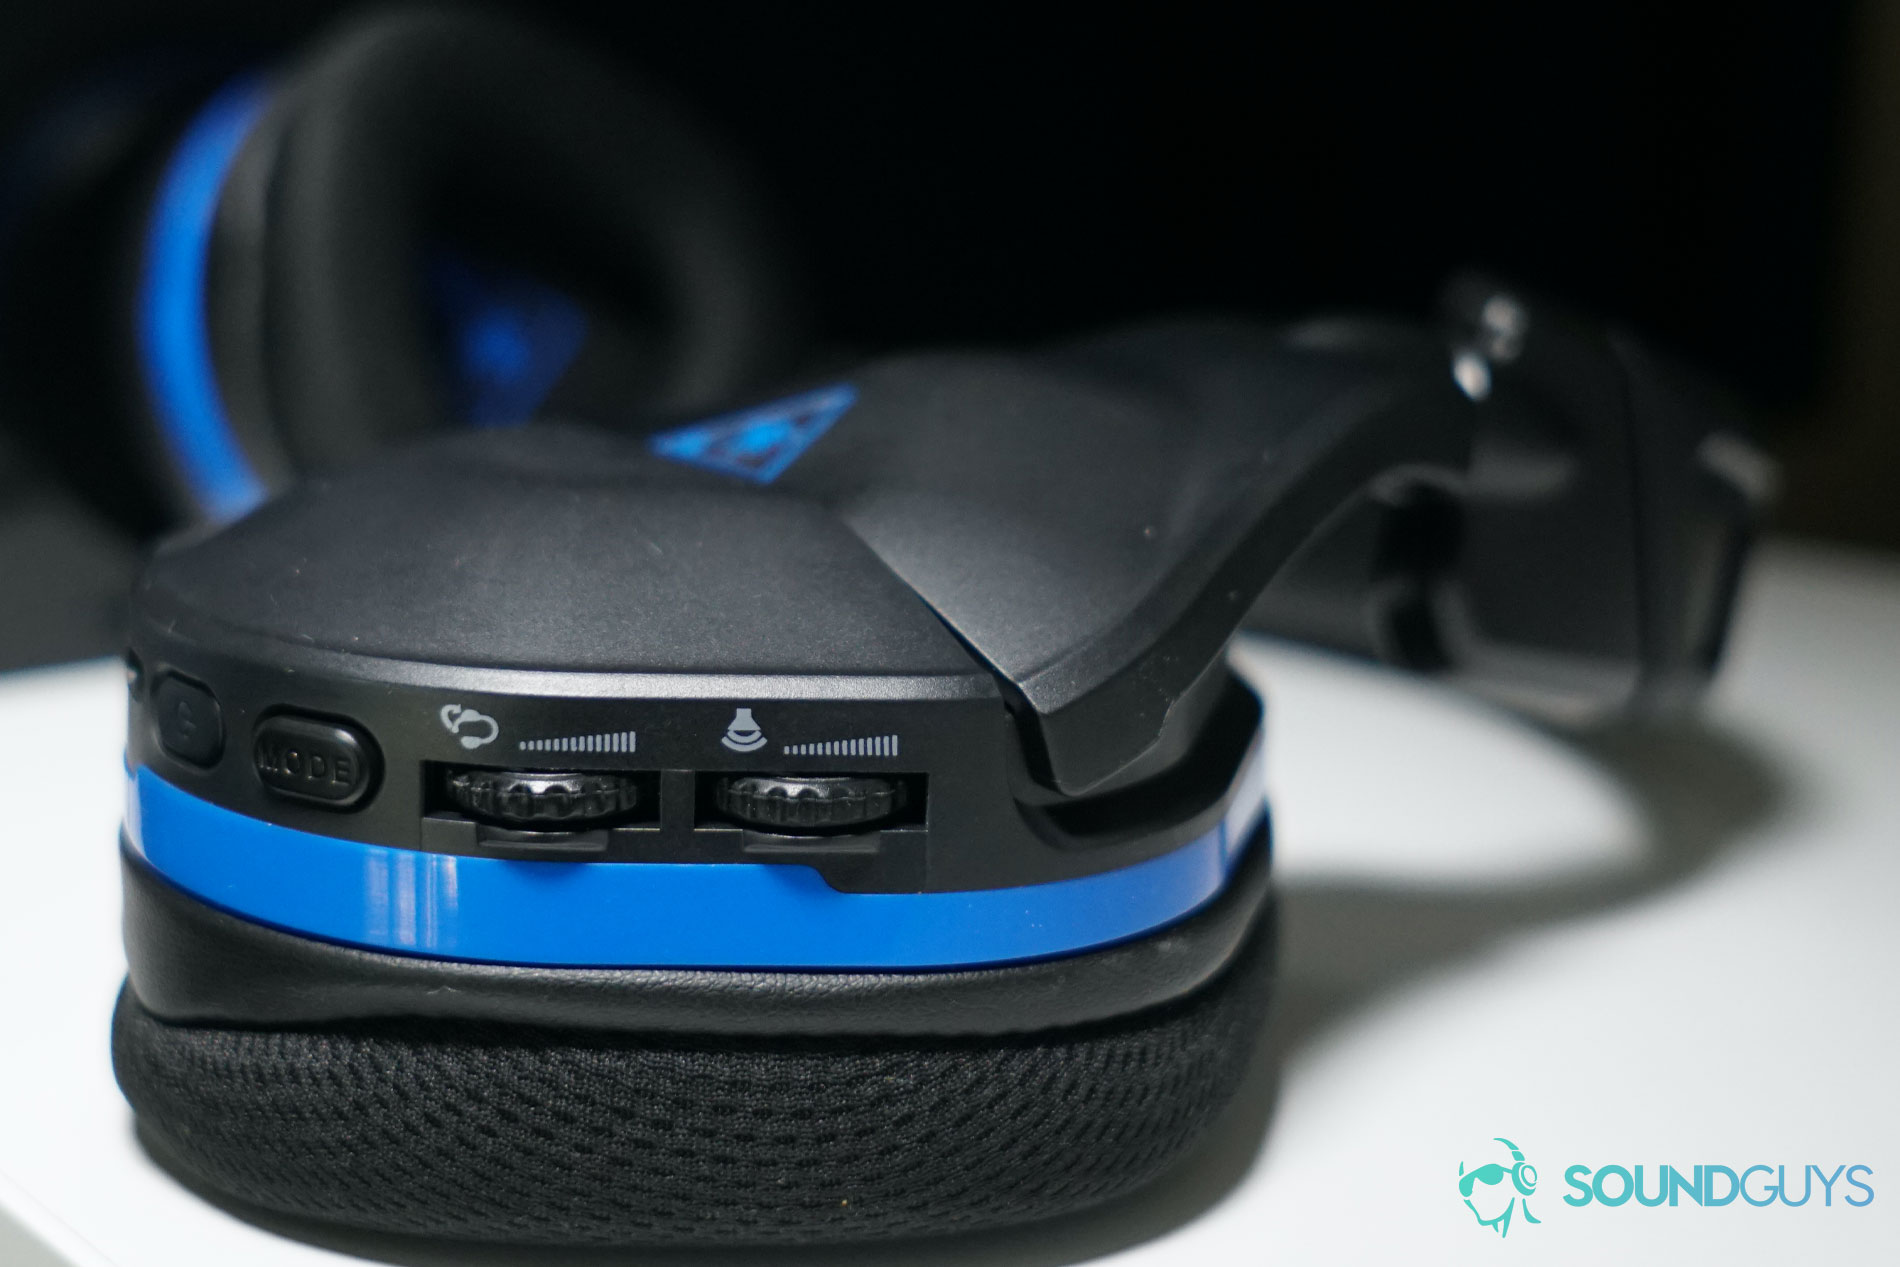 The Turtle Beach Stealth 600 Gen 2 gaming headset button and dial controls.